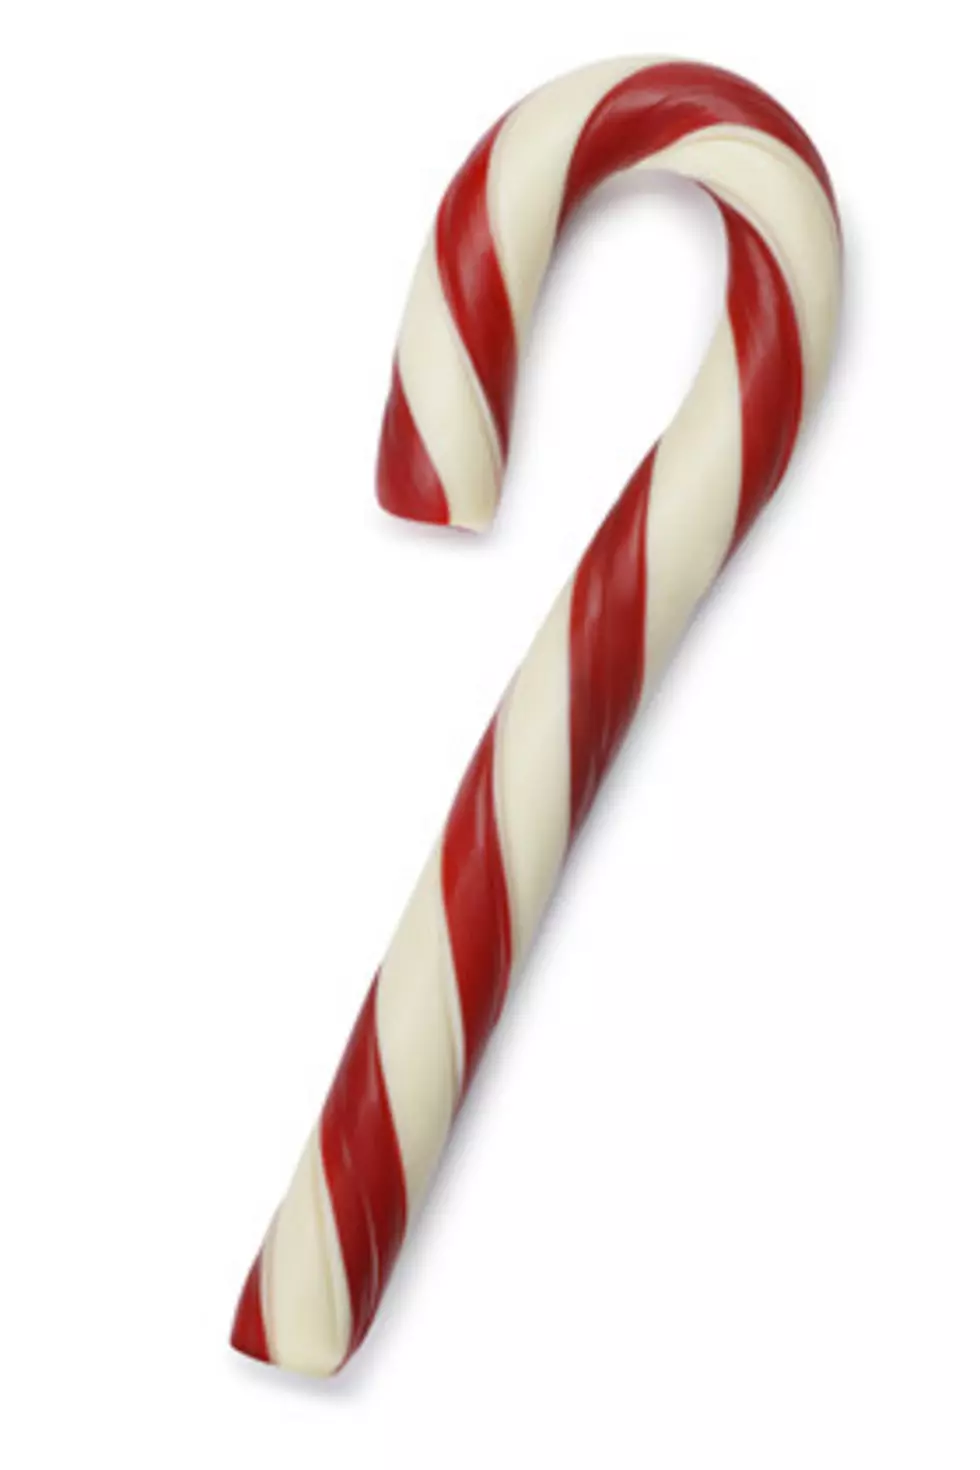 K&#8217;zoo Candy Cane Hunt Is Saturday; Moved To Mayor&#8217;s Riverfront Park